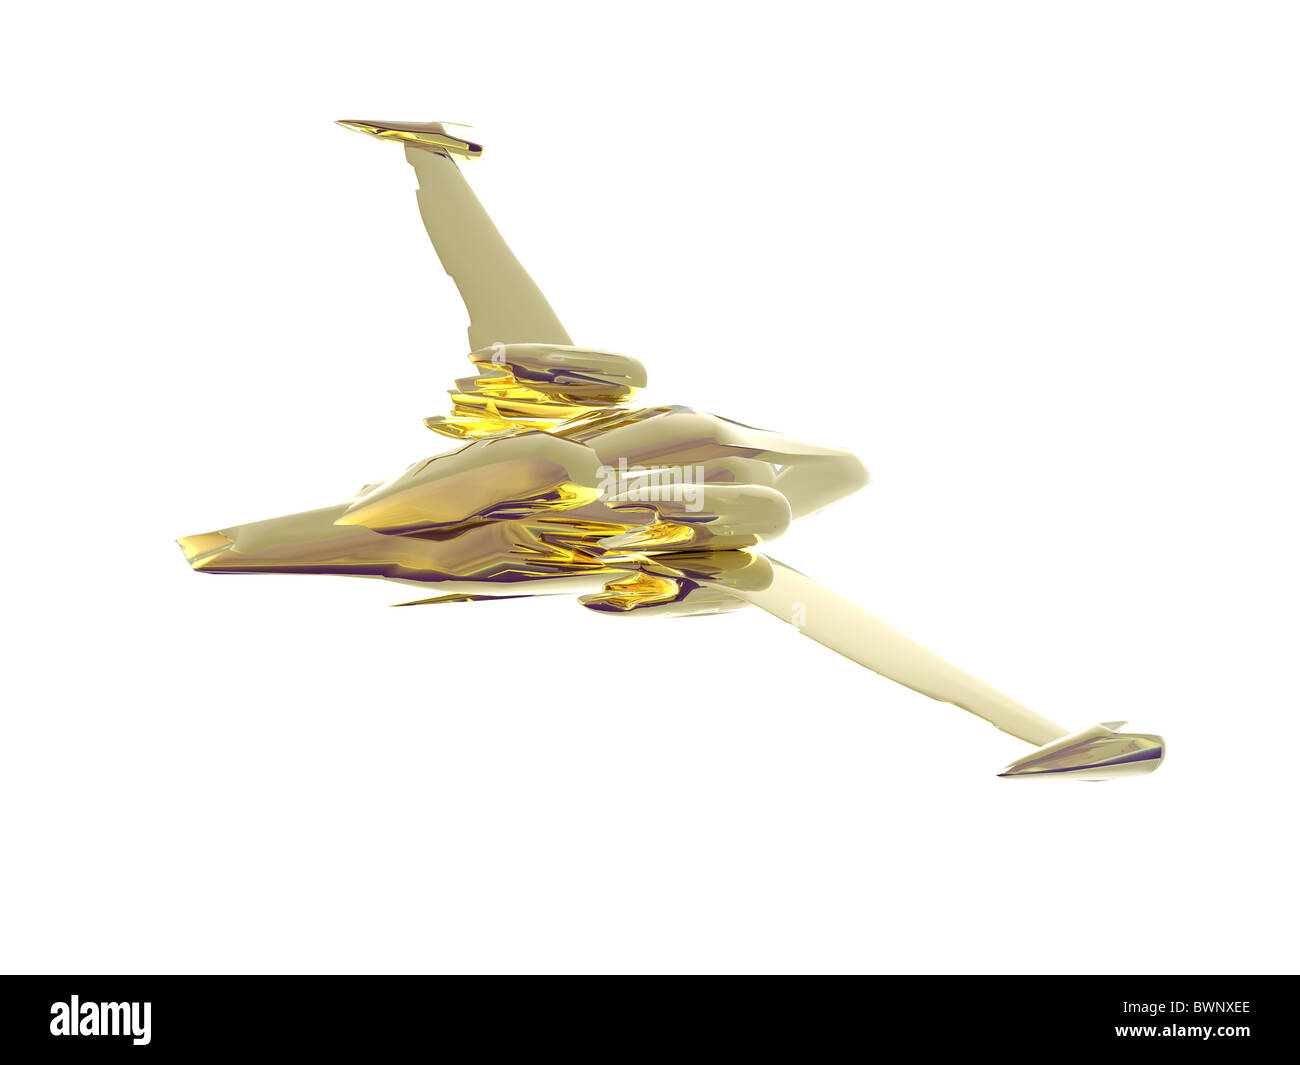 3D illustration of a golden spaceship Stock Photo